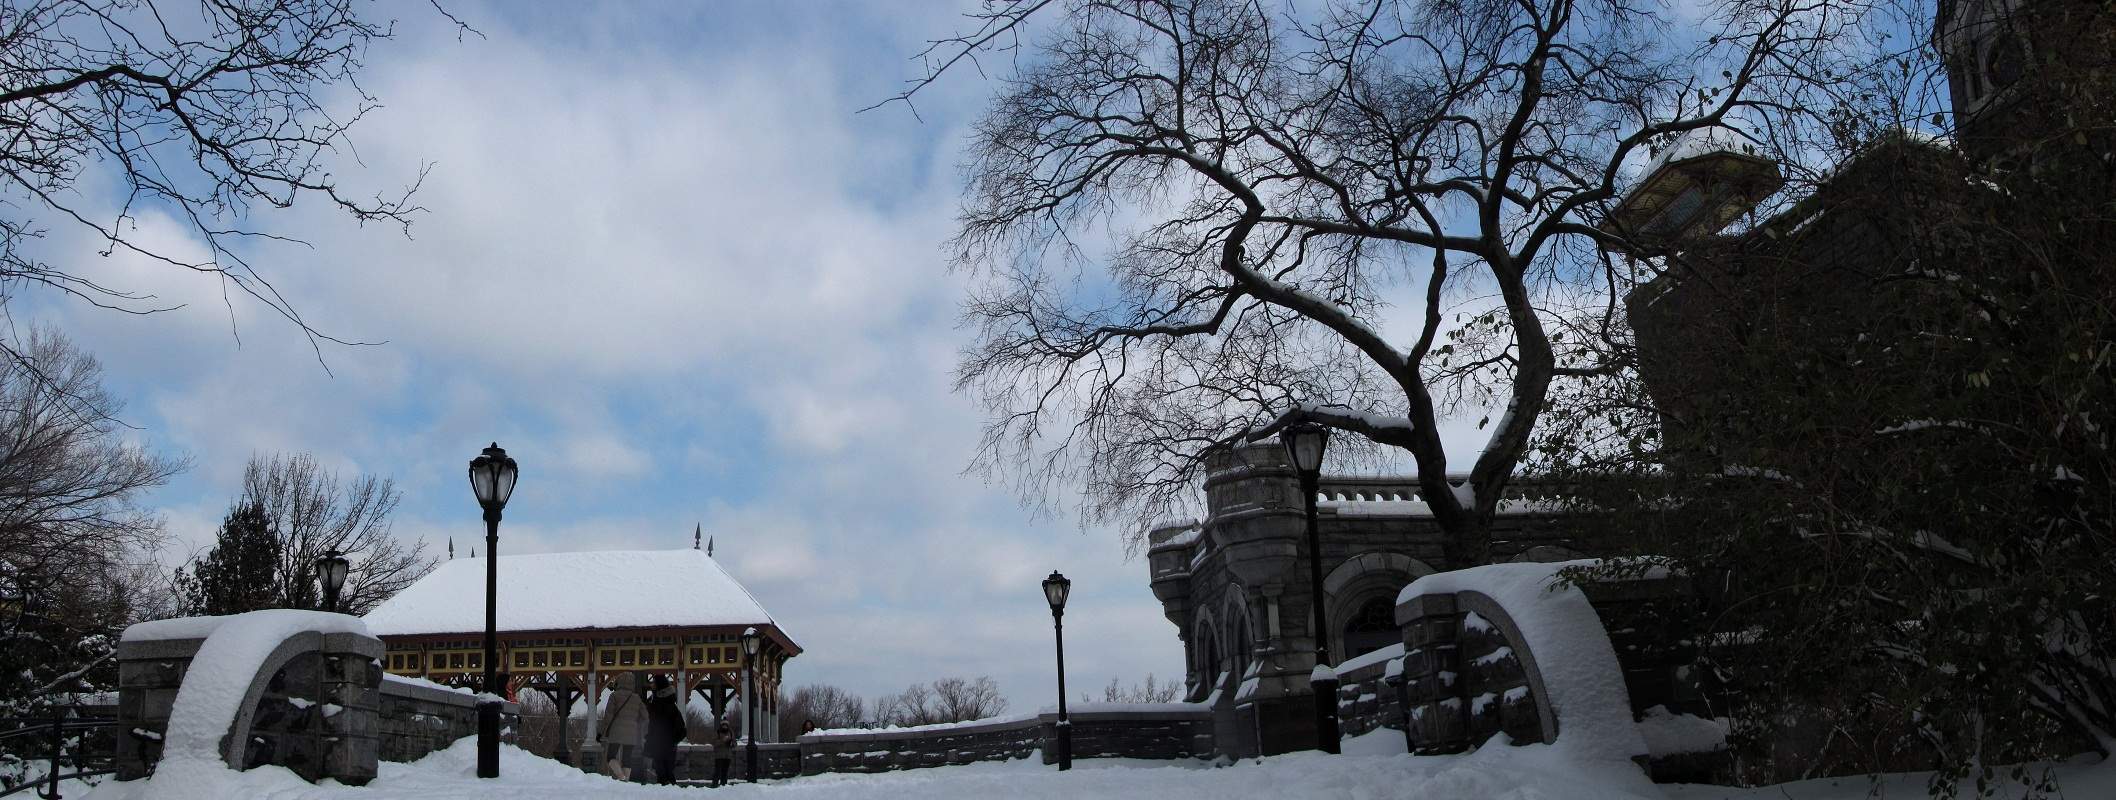 Central Park Panorama